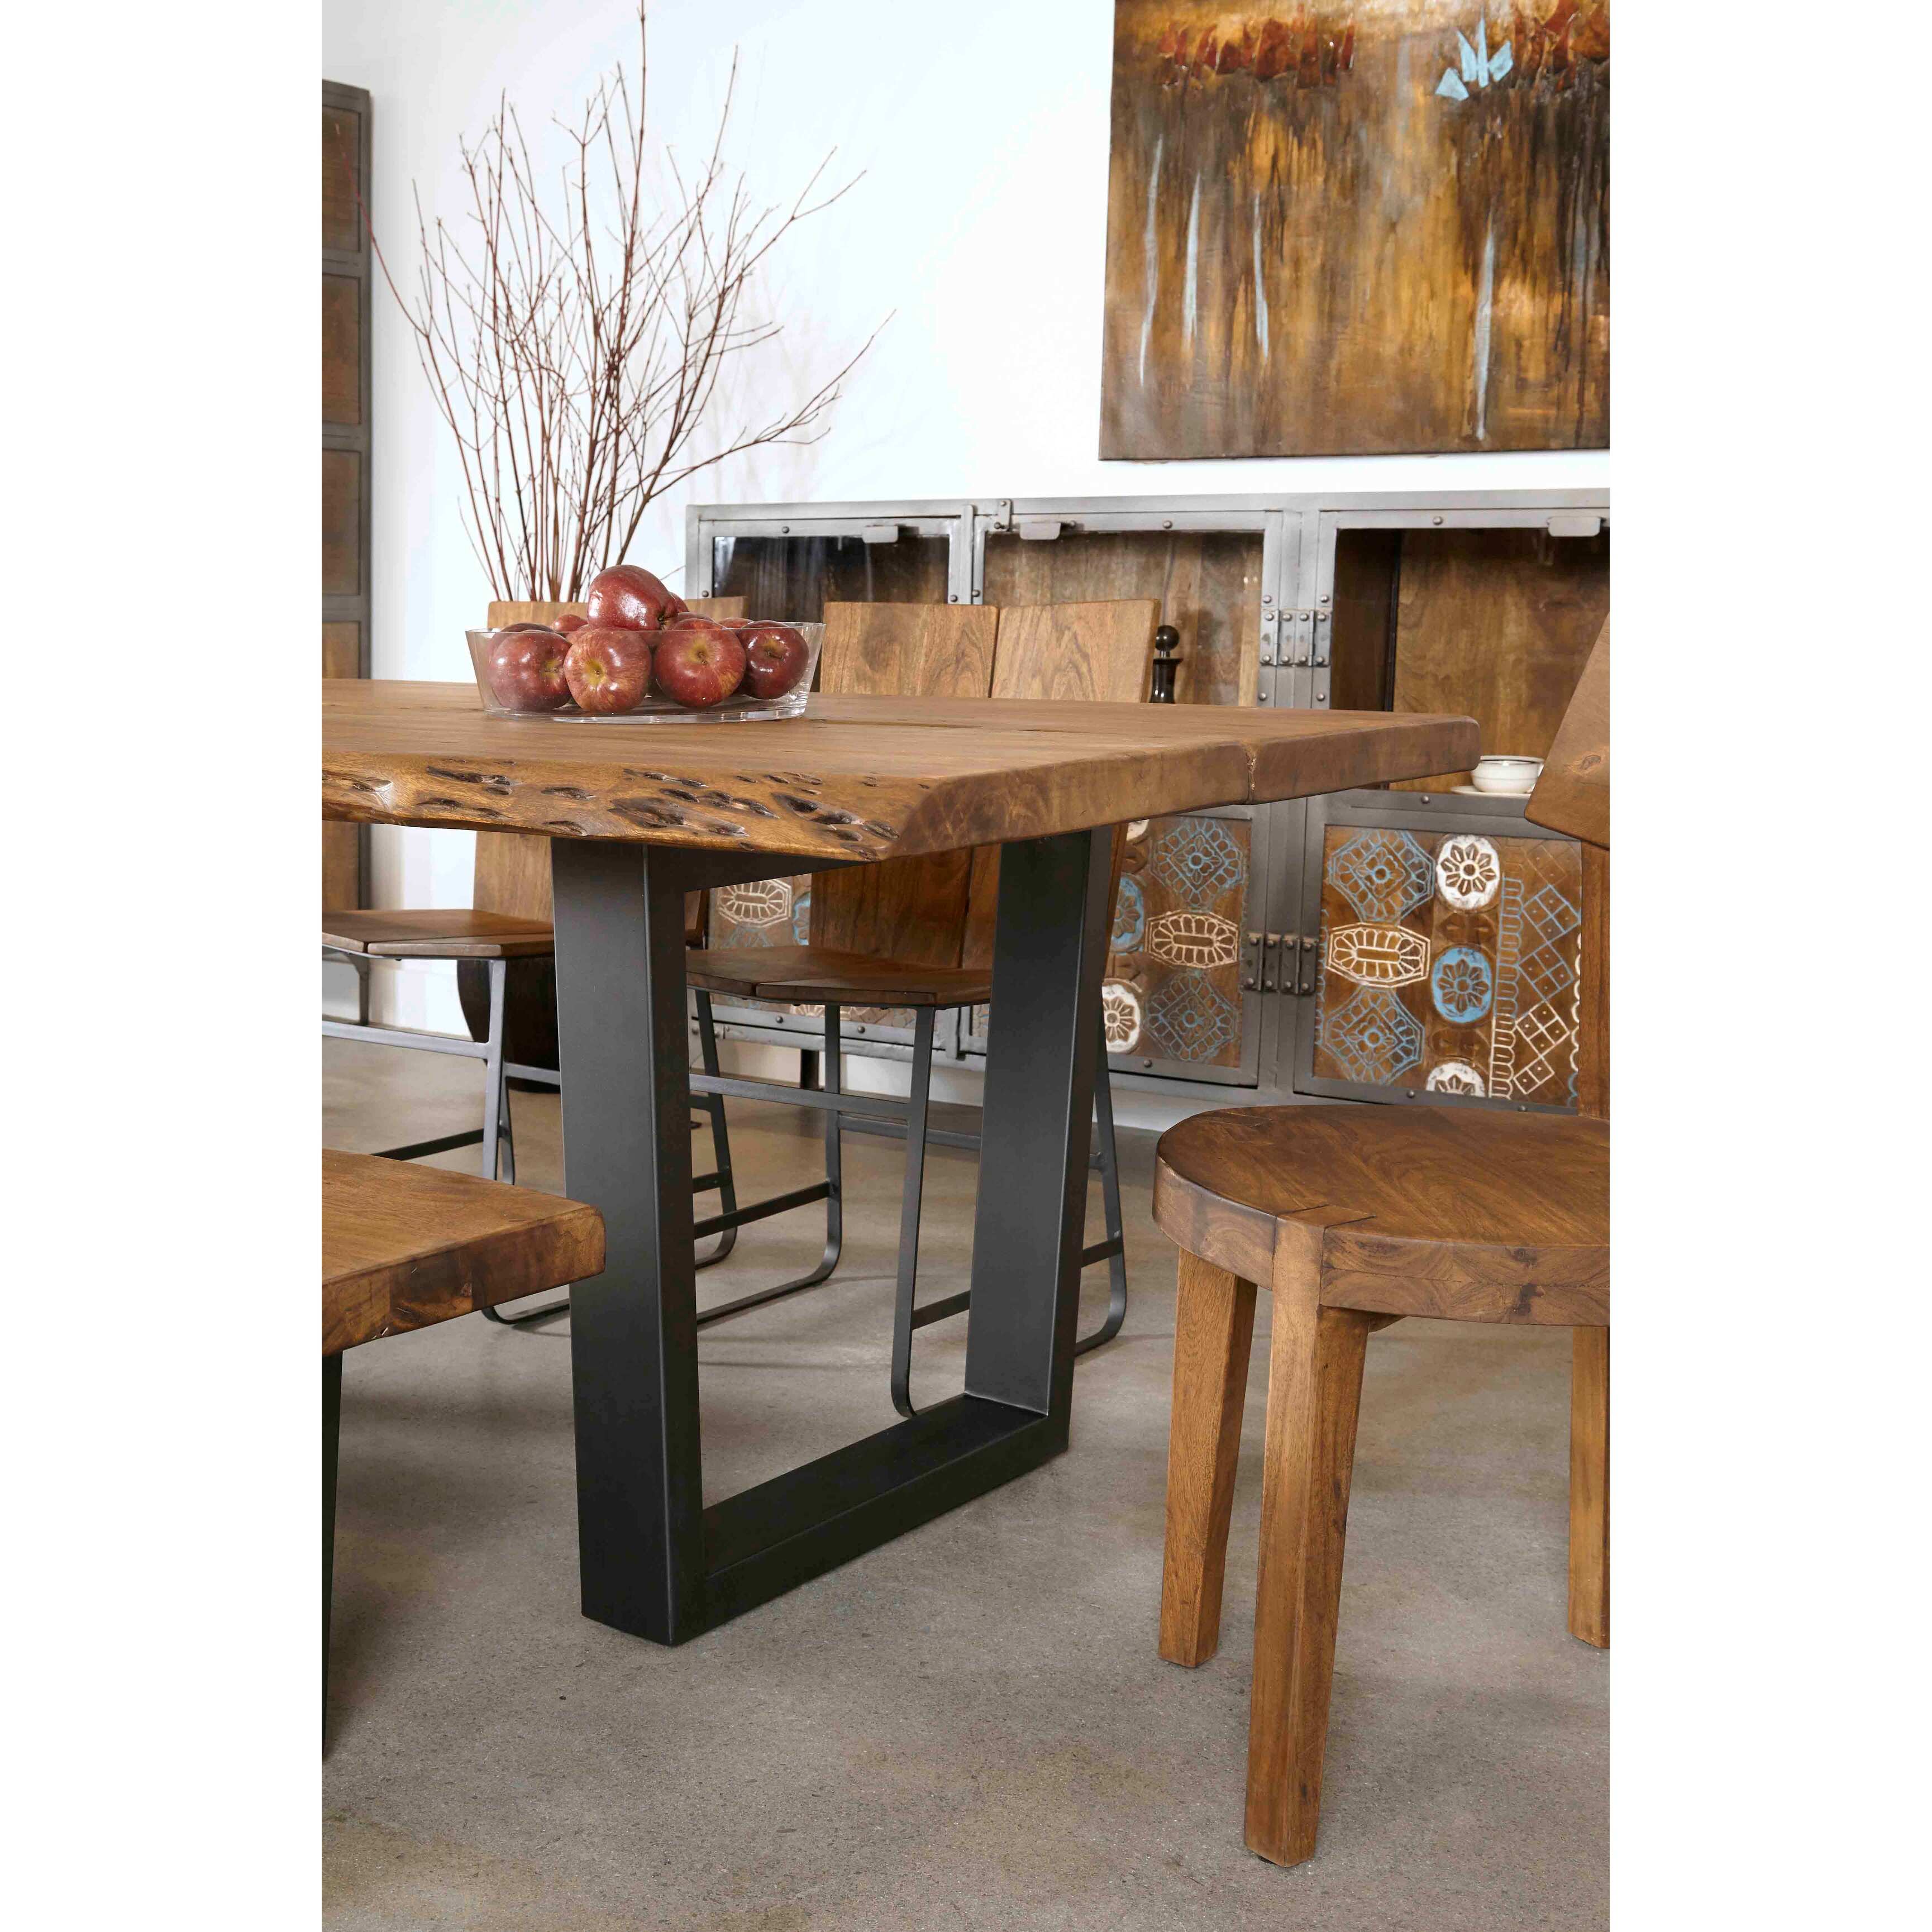 Somette Sequoia Dining Table - 2 Cartons